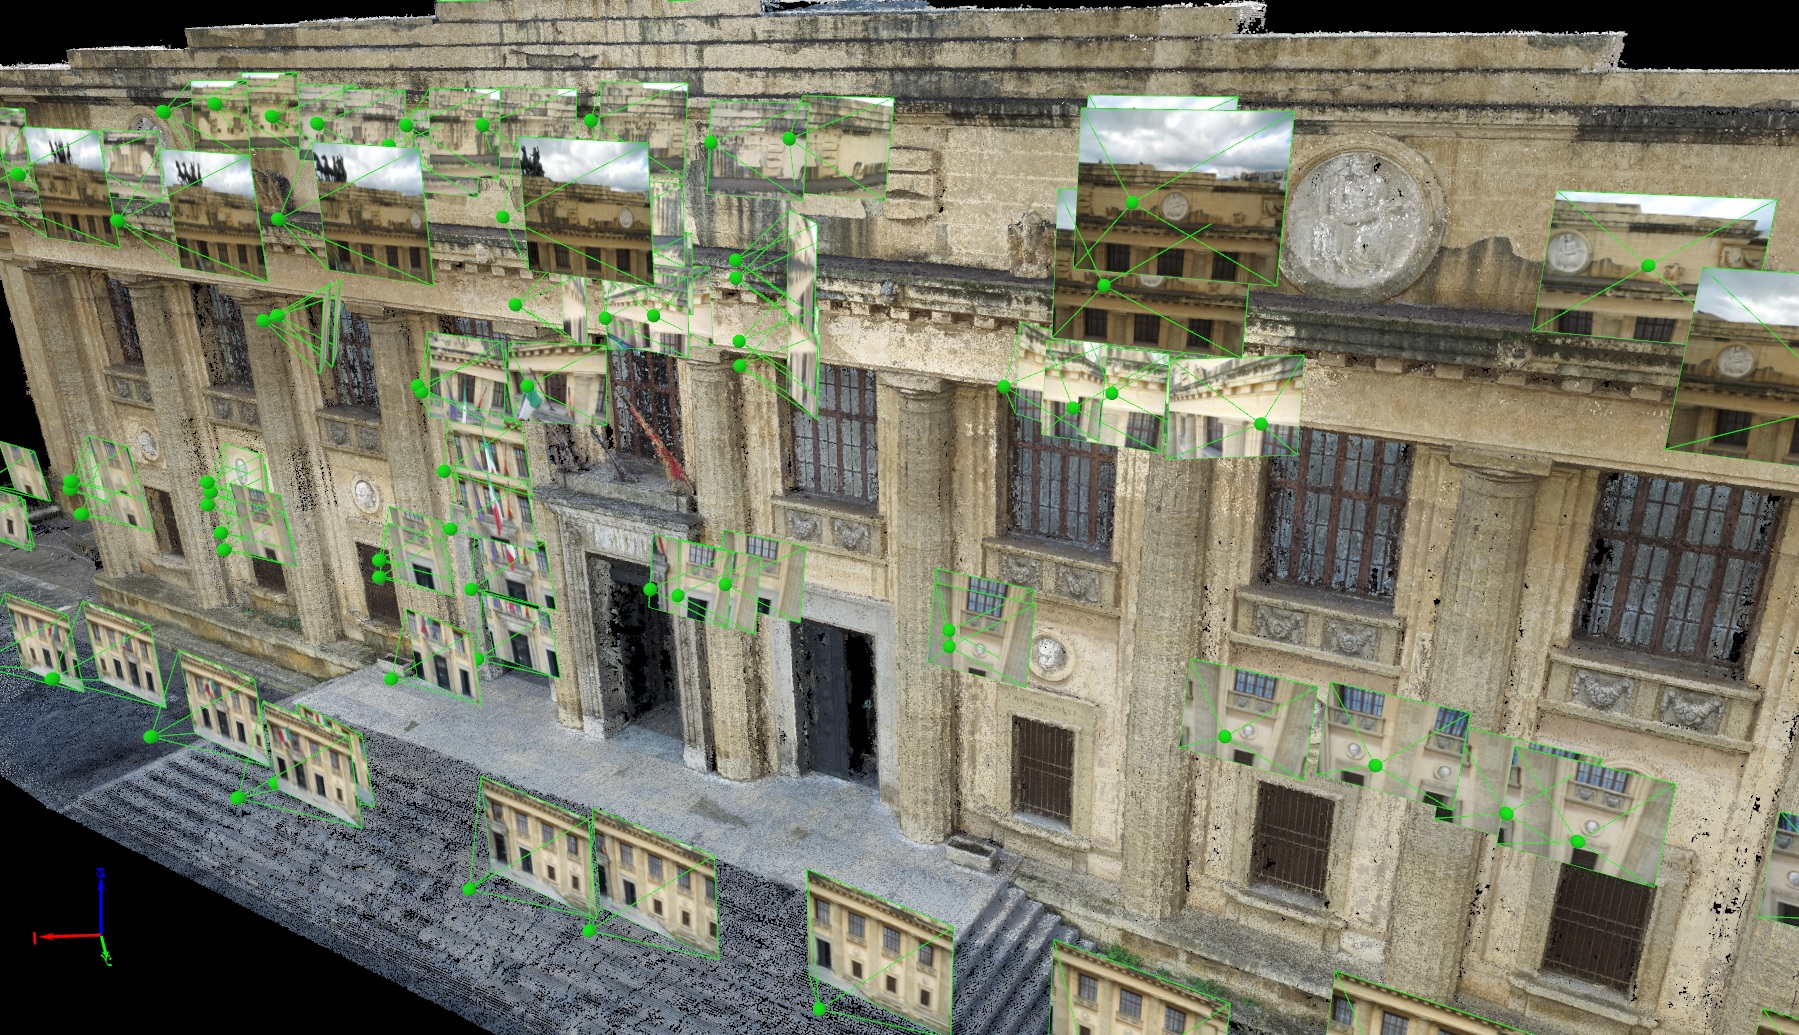 Camera positions and 3D point cloud of the main facade in Pix4Dmapper rayCloud